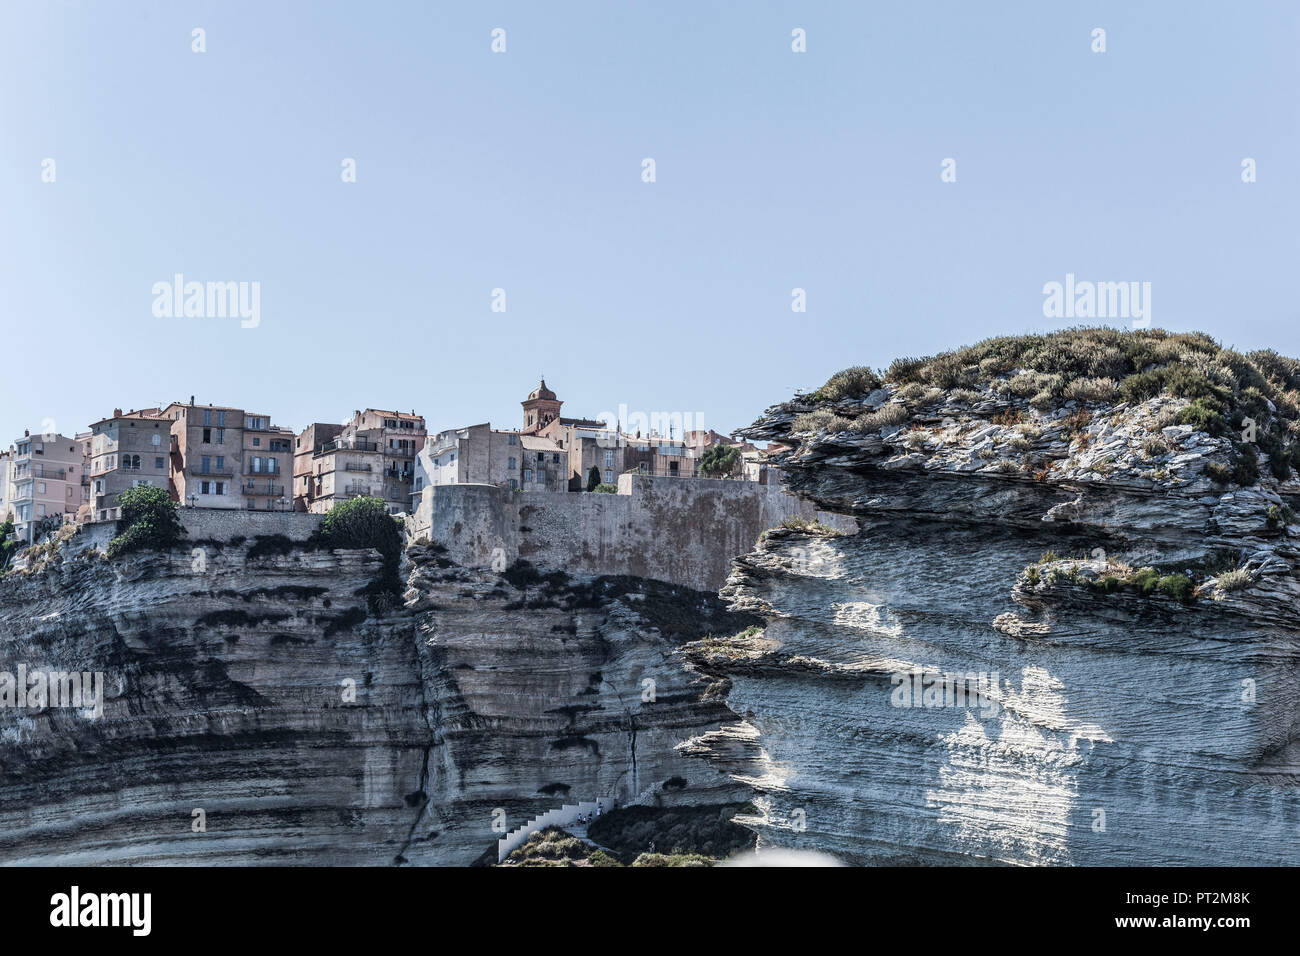 View of Bonifacio, Corsica and the rugged rocks from the sea Stock Photo